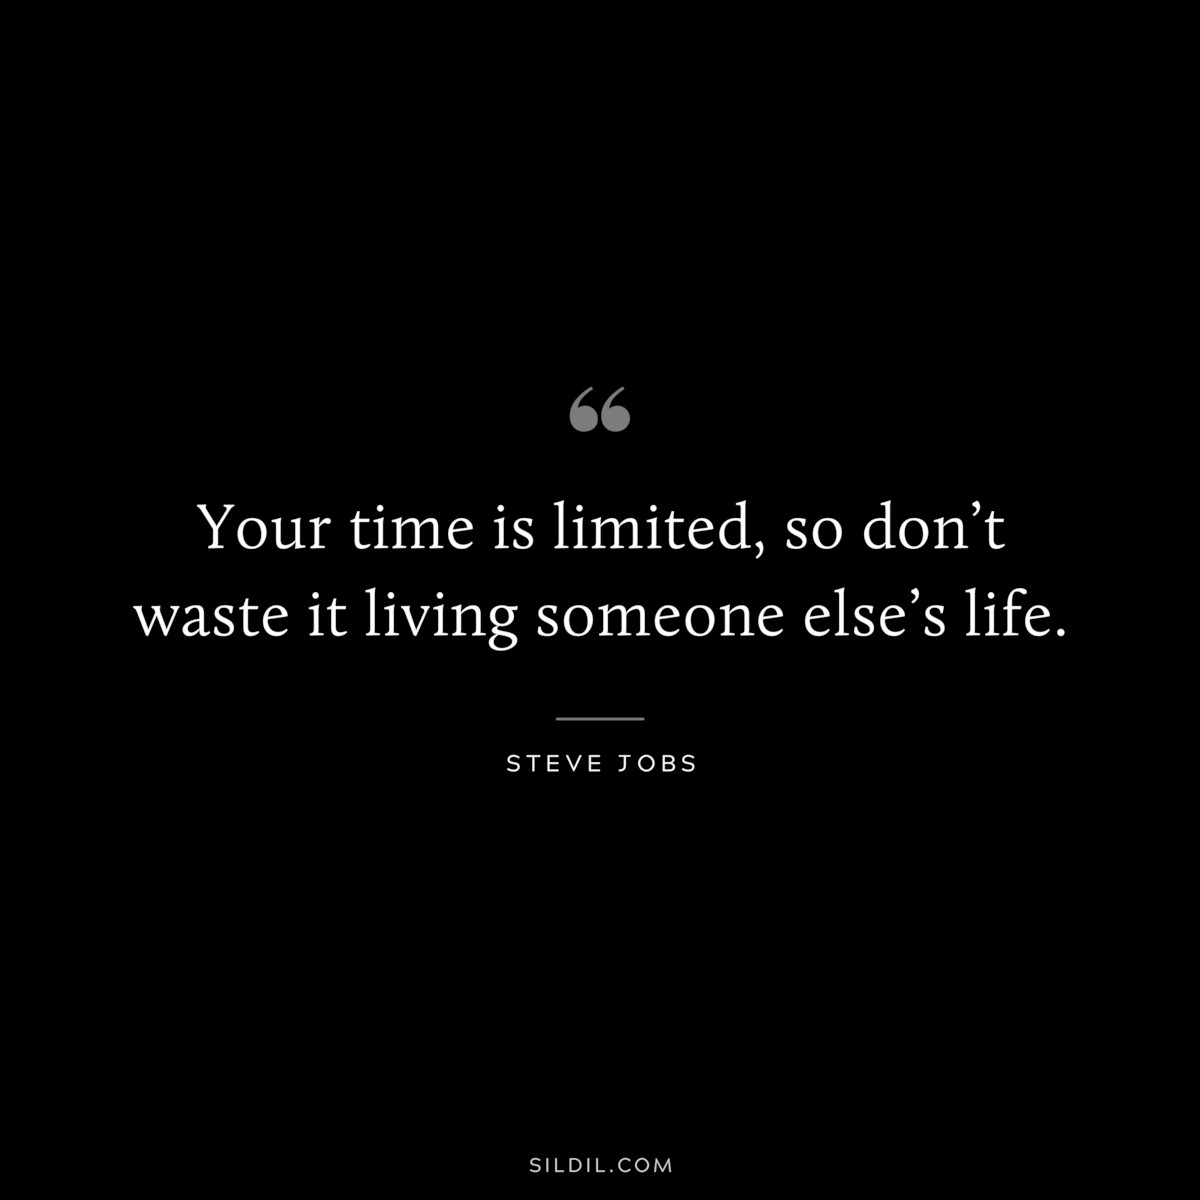 Your time is limited, so don’t waste it living someone else’s life. ― Steve Jobs